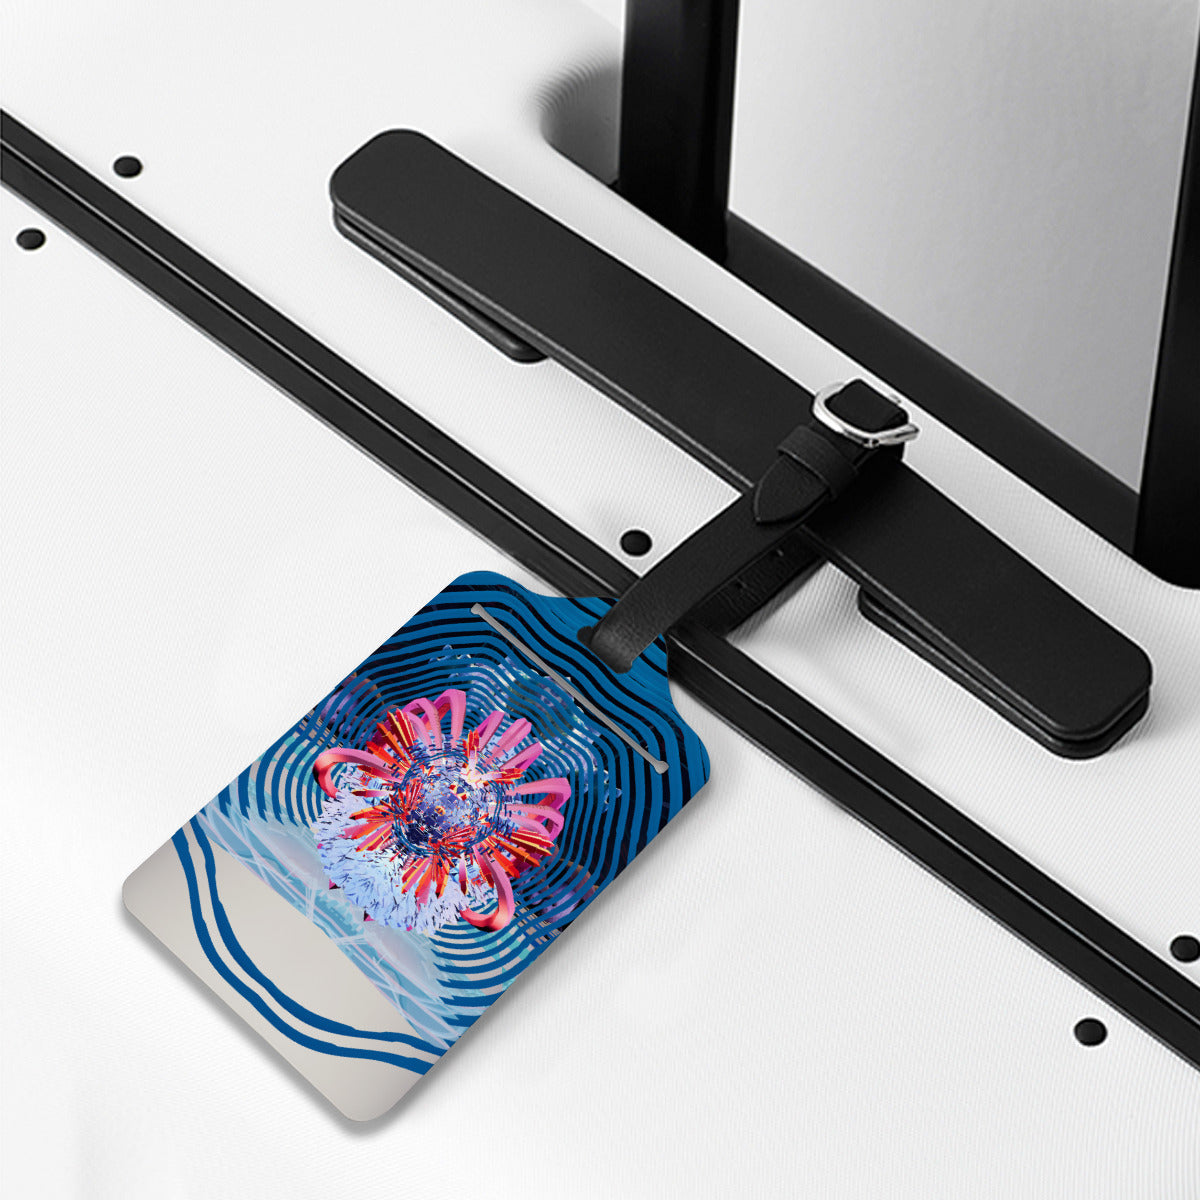 Psychedelic 3D Digital Art Luggage Tags